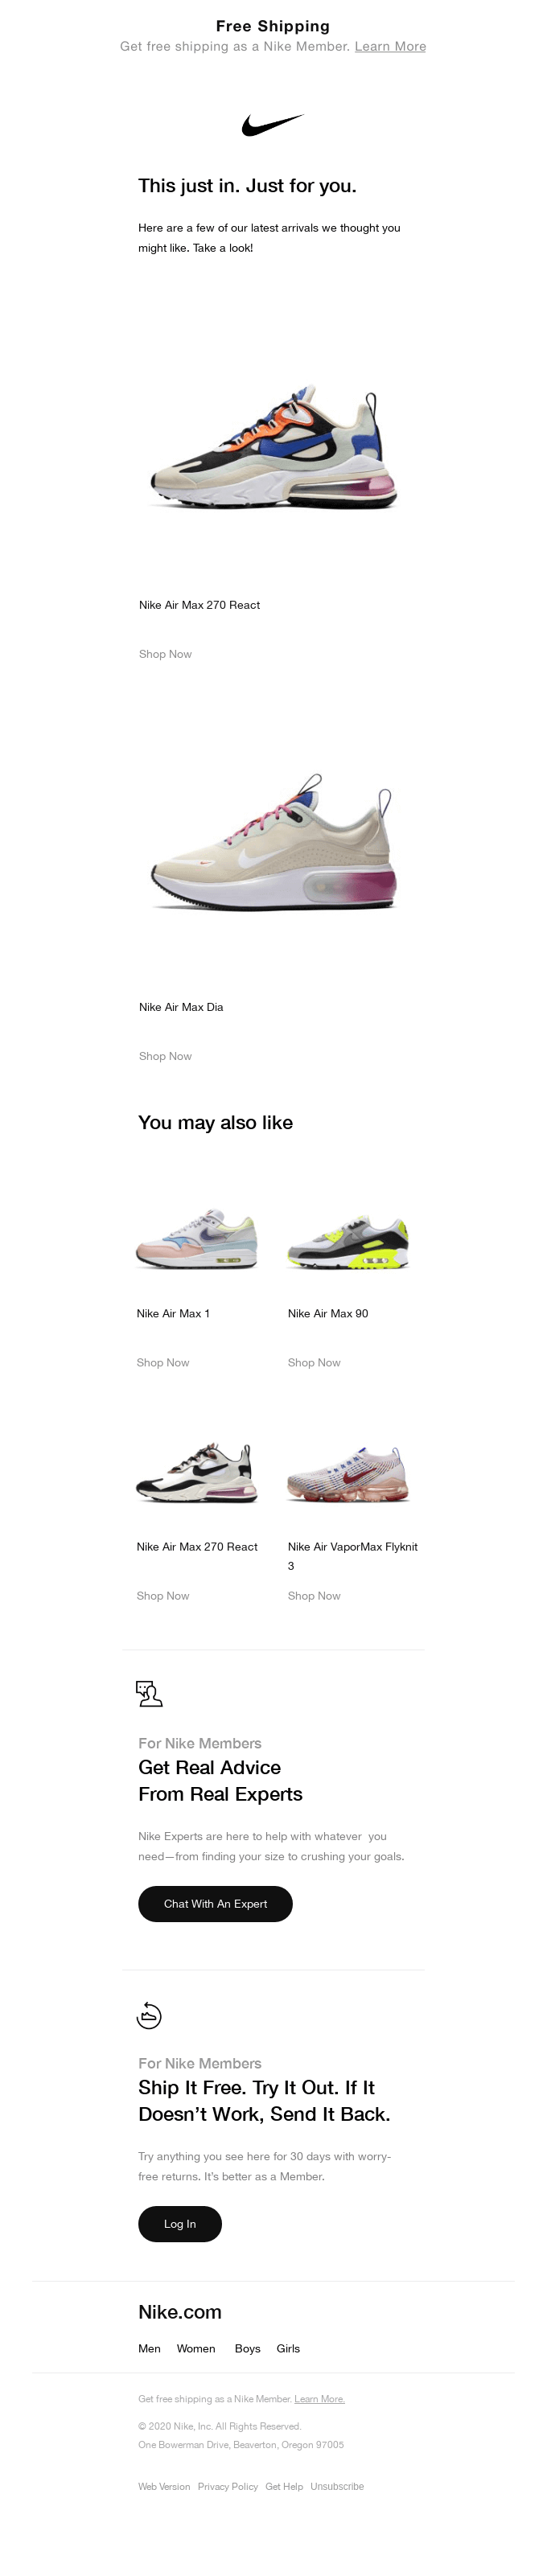 Nike's email layout where content has been spaced into relevant bucket